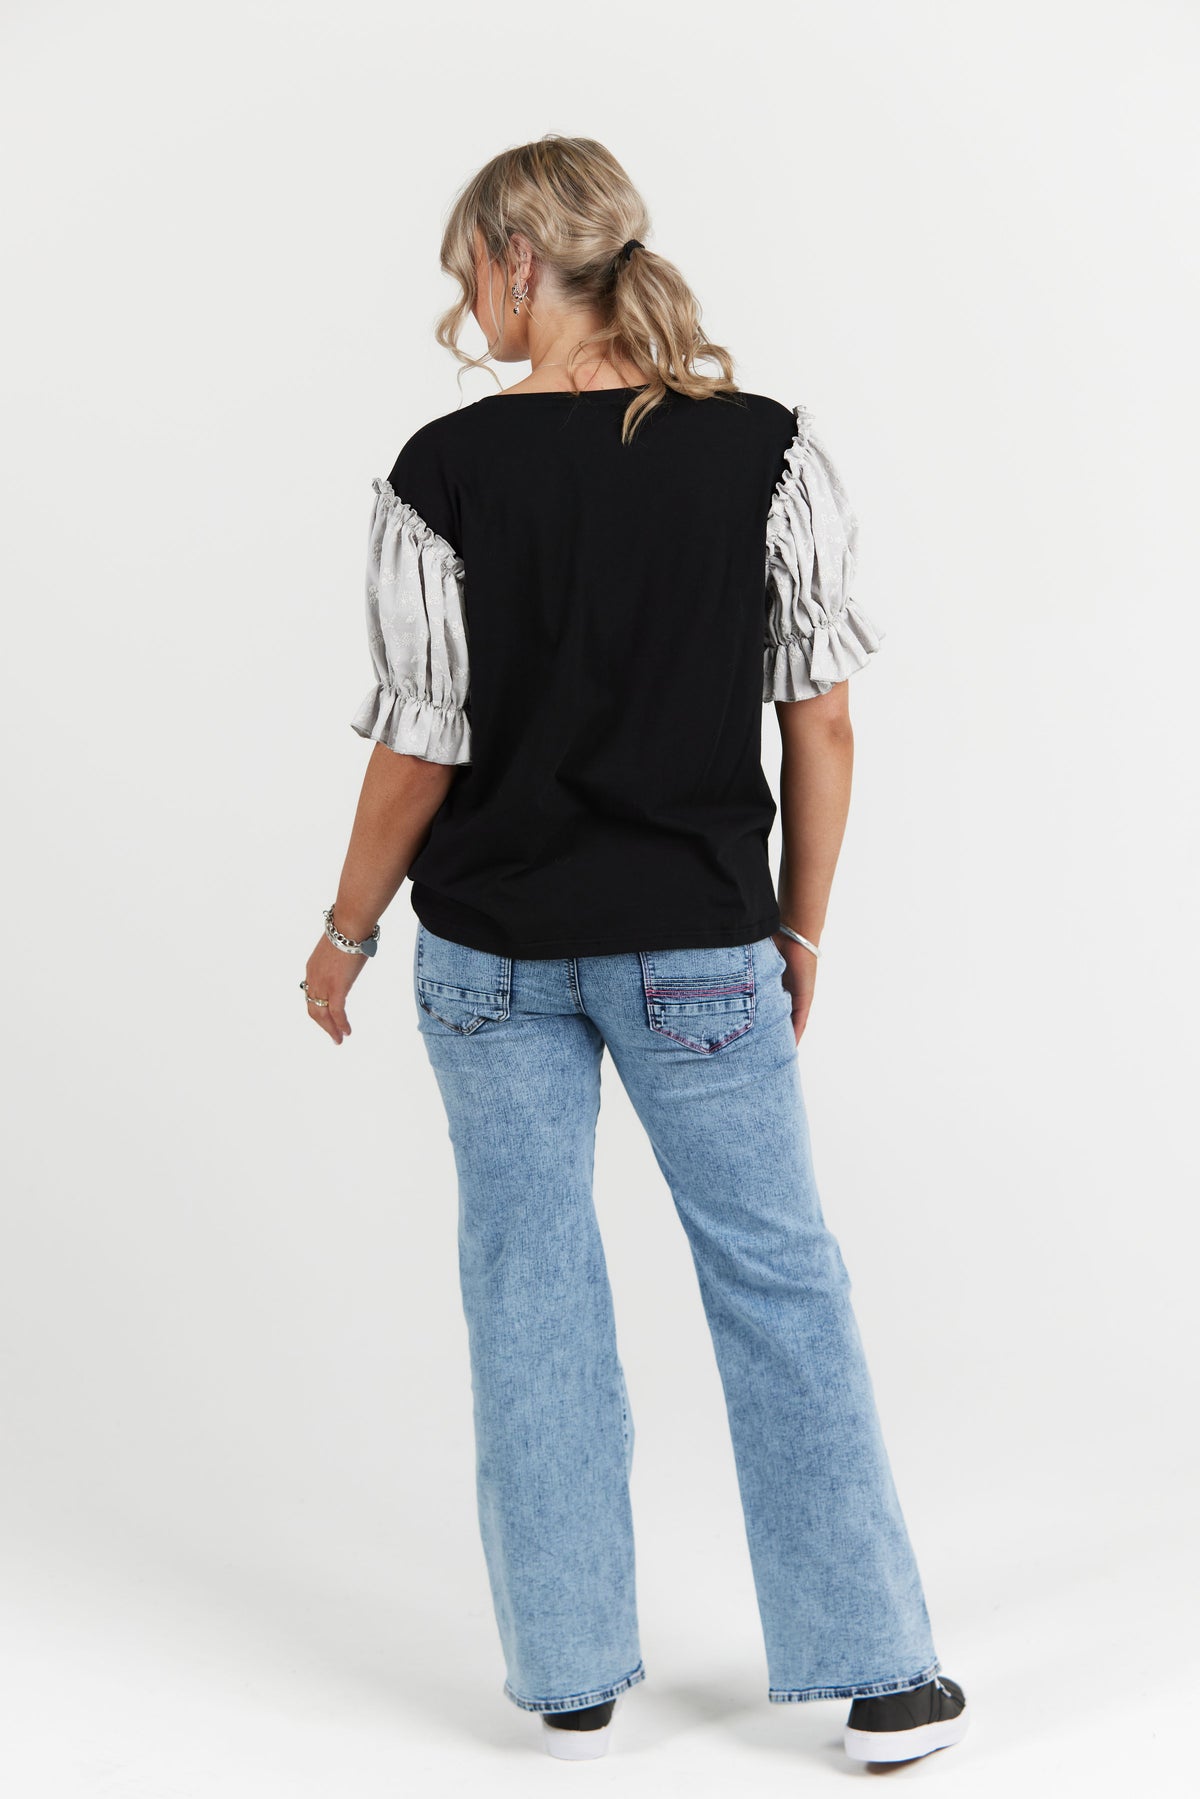 Rosa Top Black With Silver Sleeve